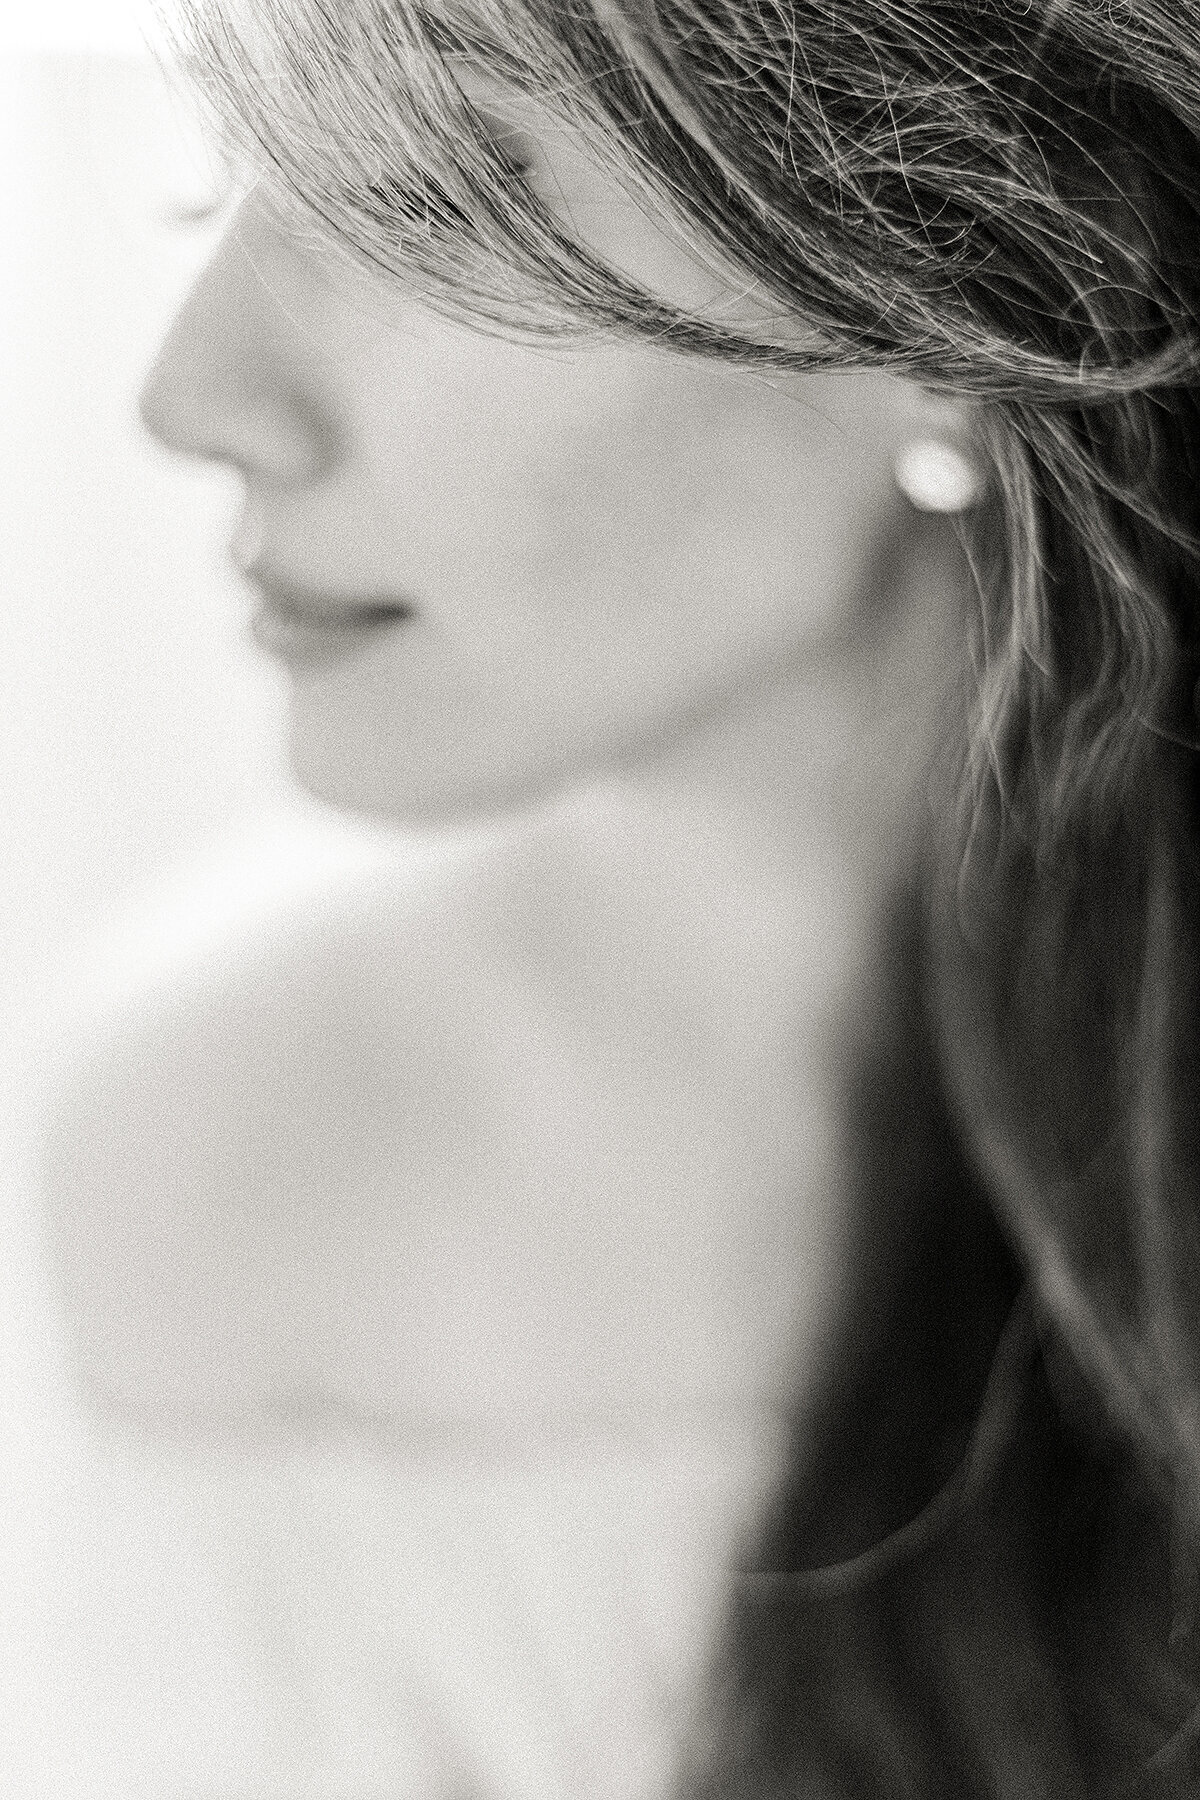 Delicate black and white close up photo of a woman with her hair gently draped of her hair as she looks down and smiles.